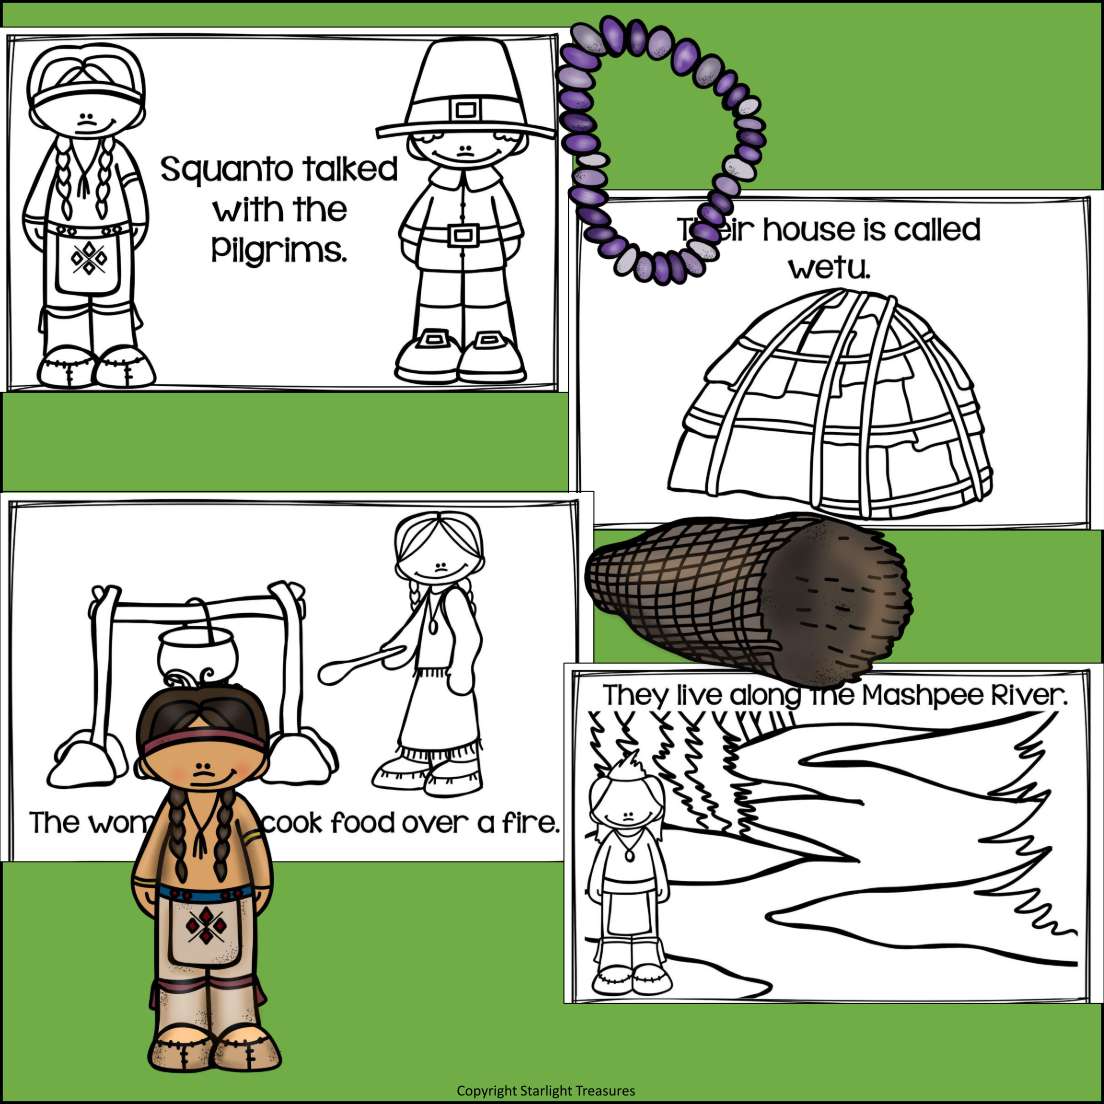 wampanoag coloring pages